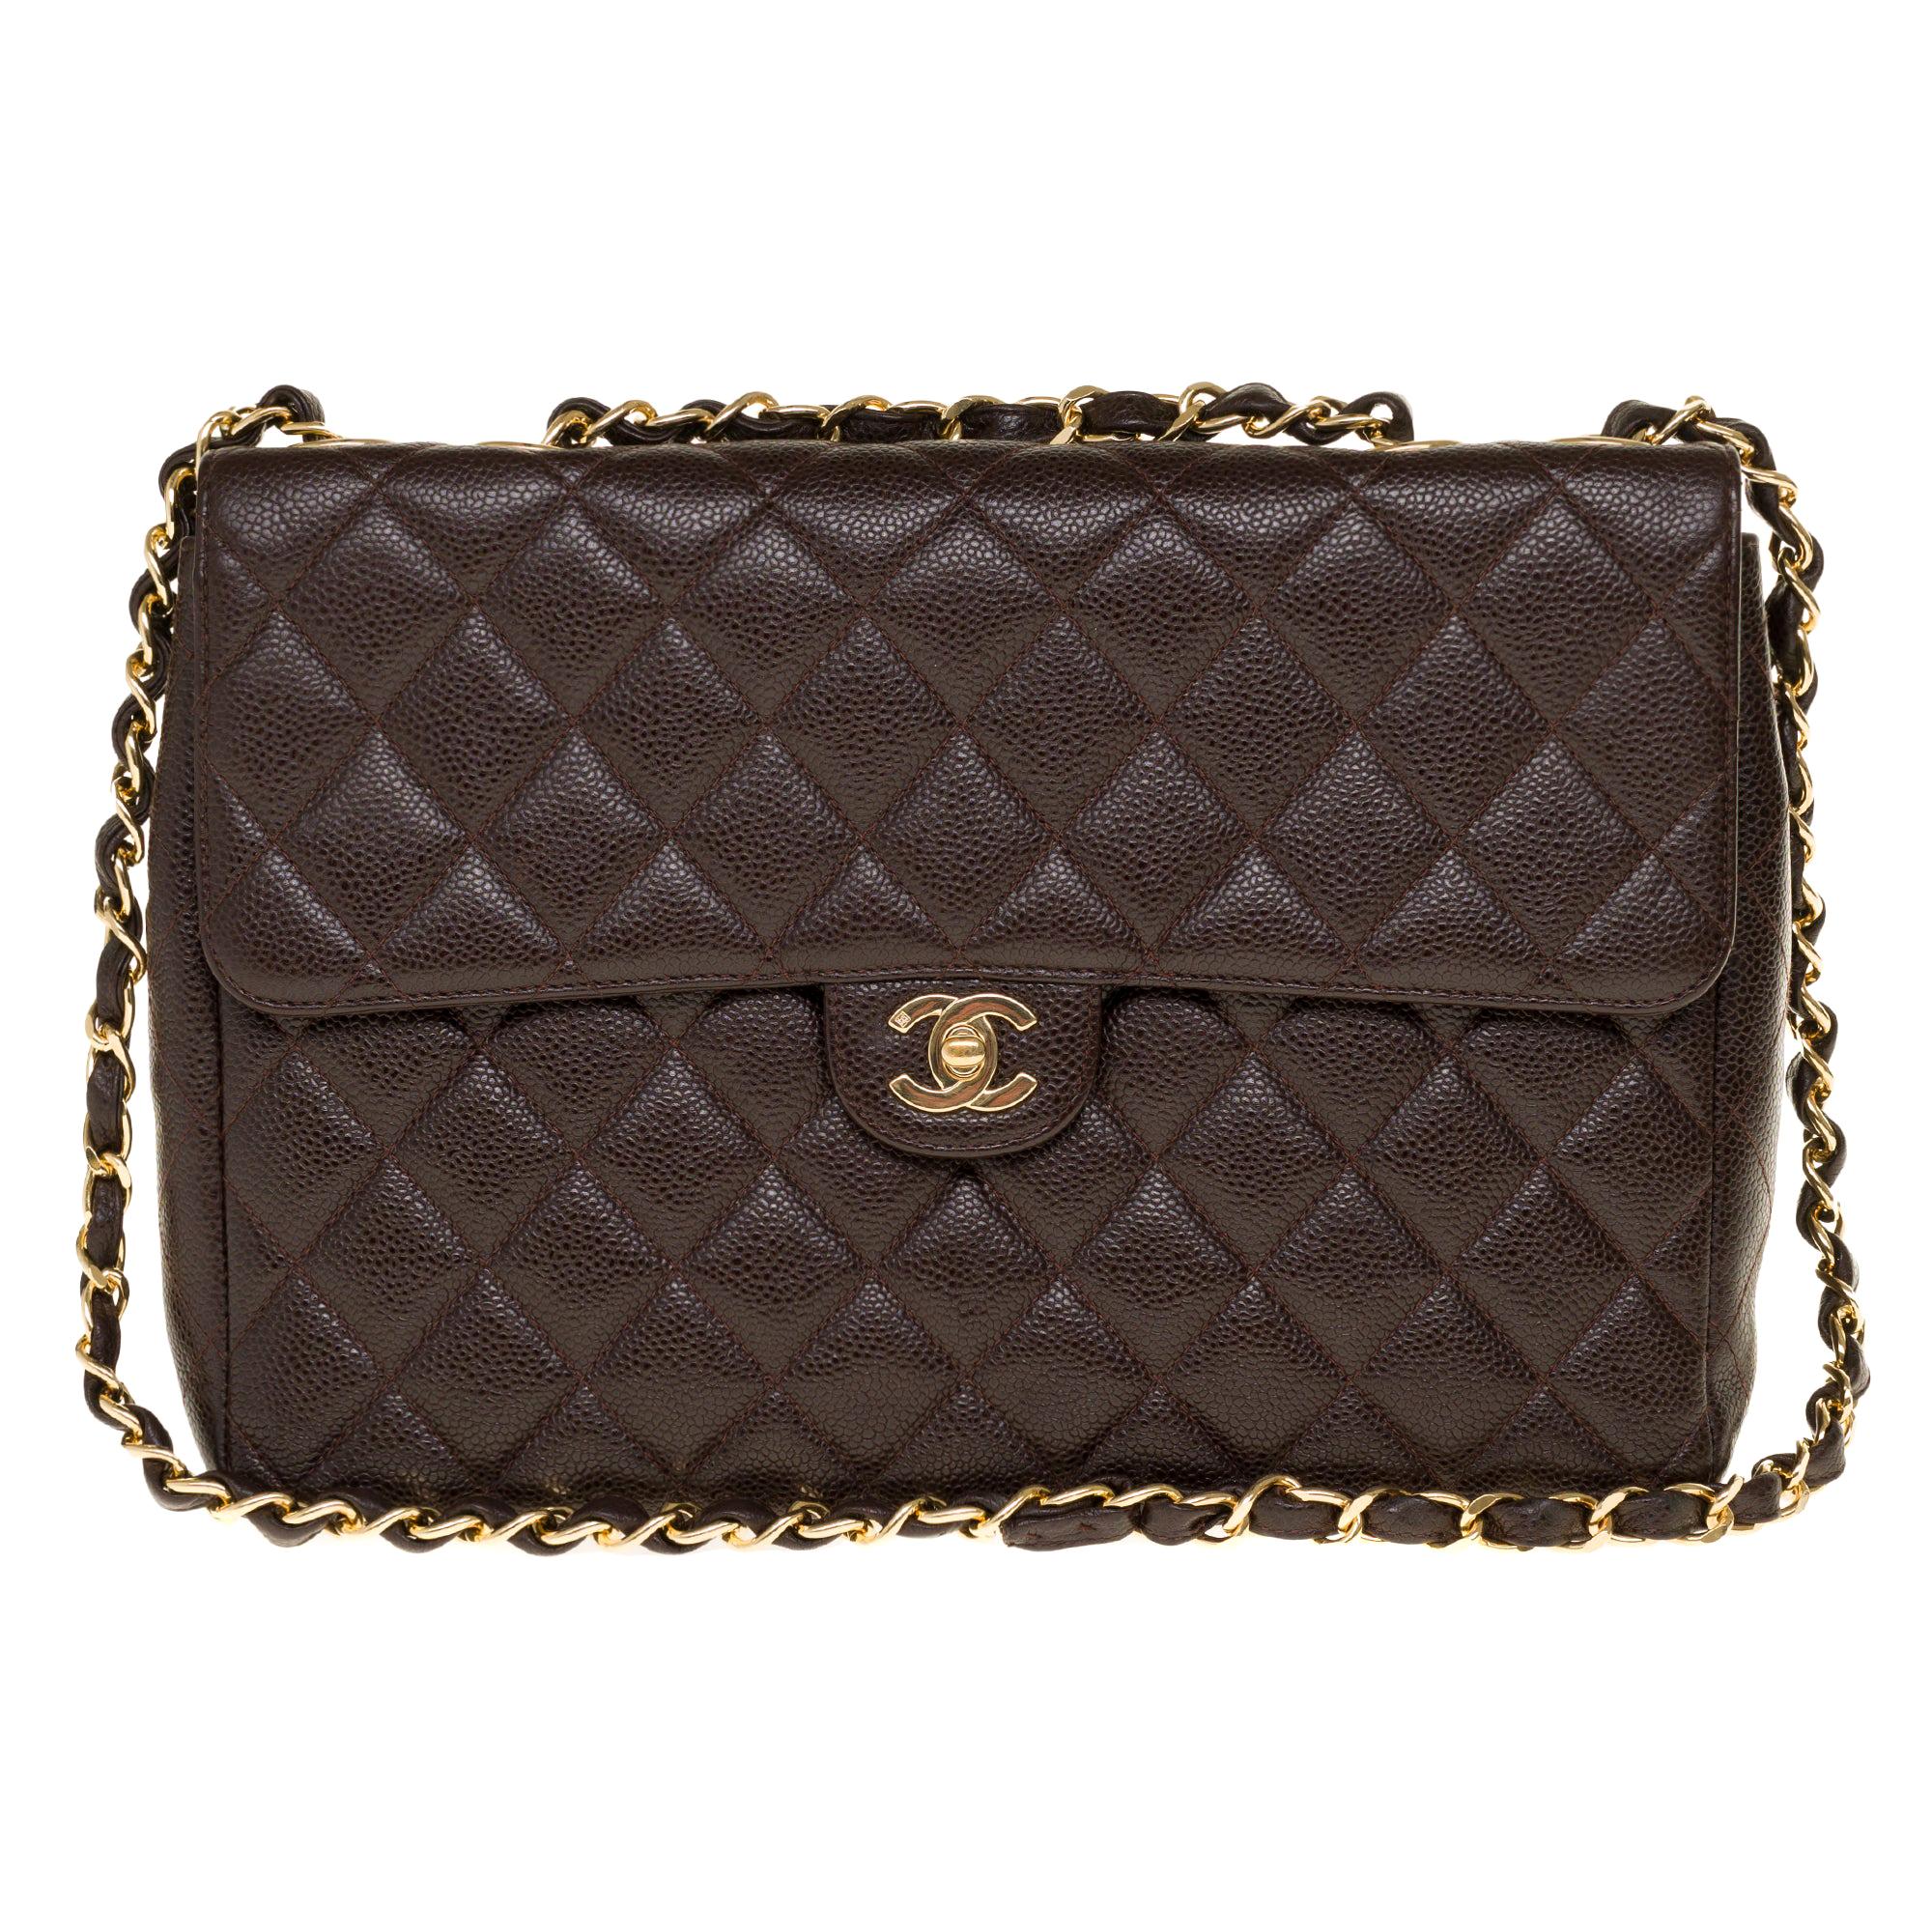 Chanel Timeless Jumbo single flap handbag in brown quilted caviar leather, GHW